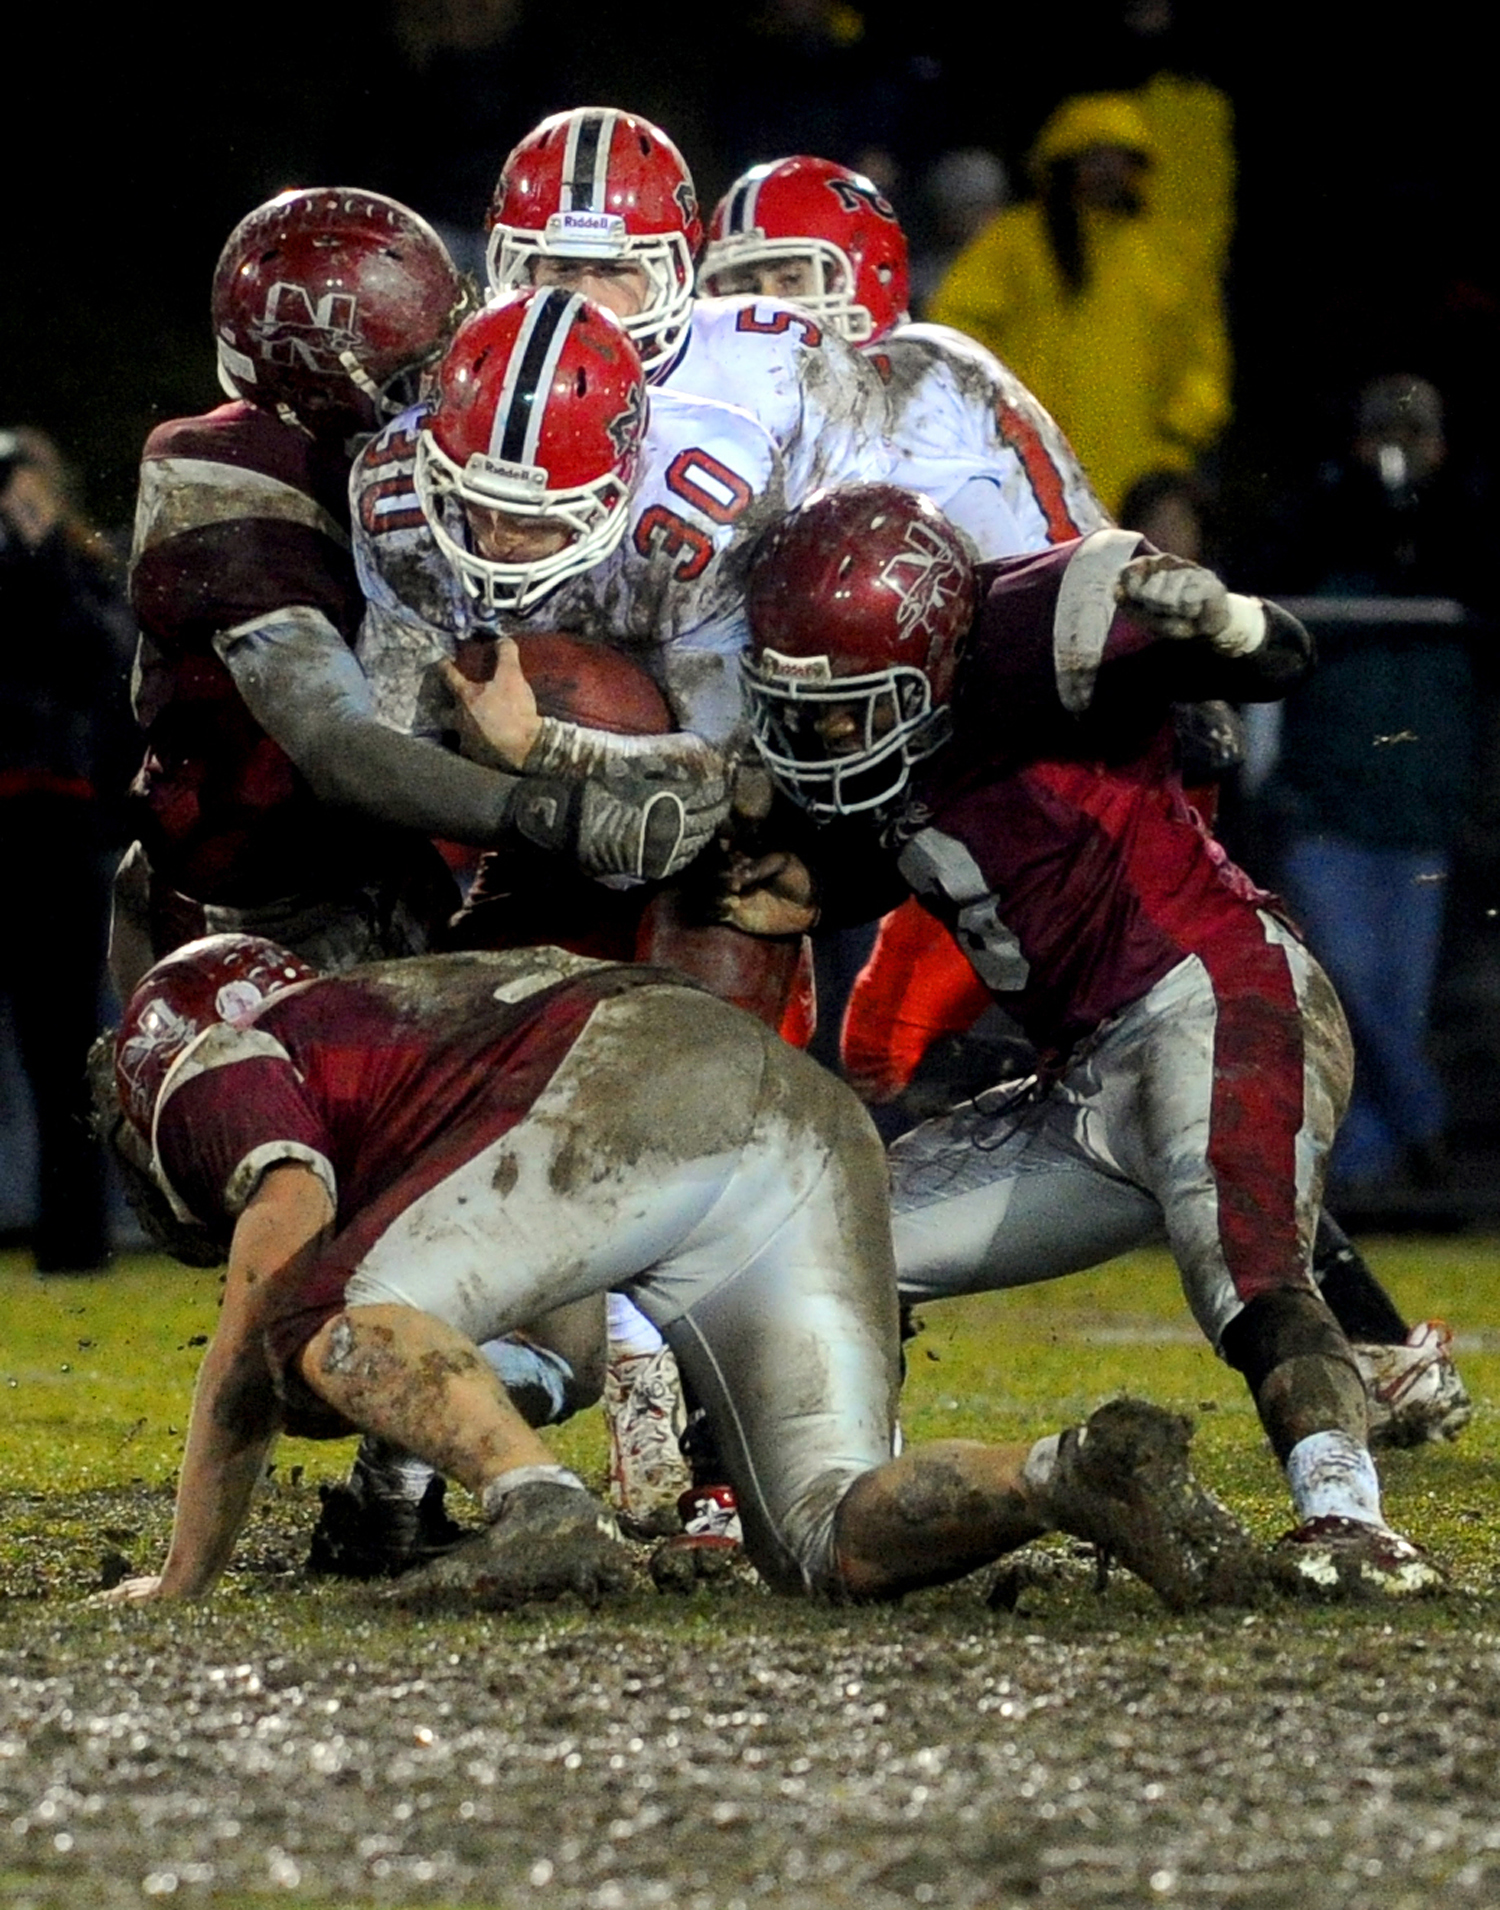  New Canaan's Conor Goodwin is tackled during Tuesday's Class L quarterfinal game at Naugatuck High School on November 30, 2010. 